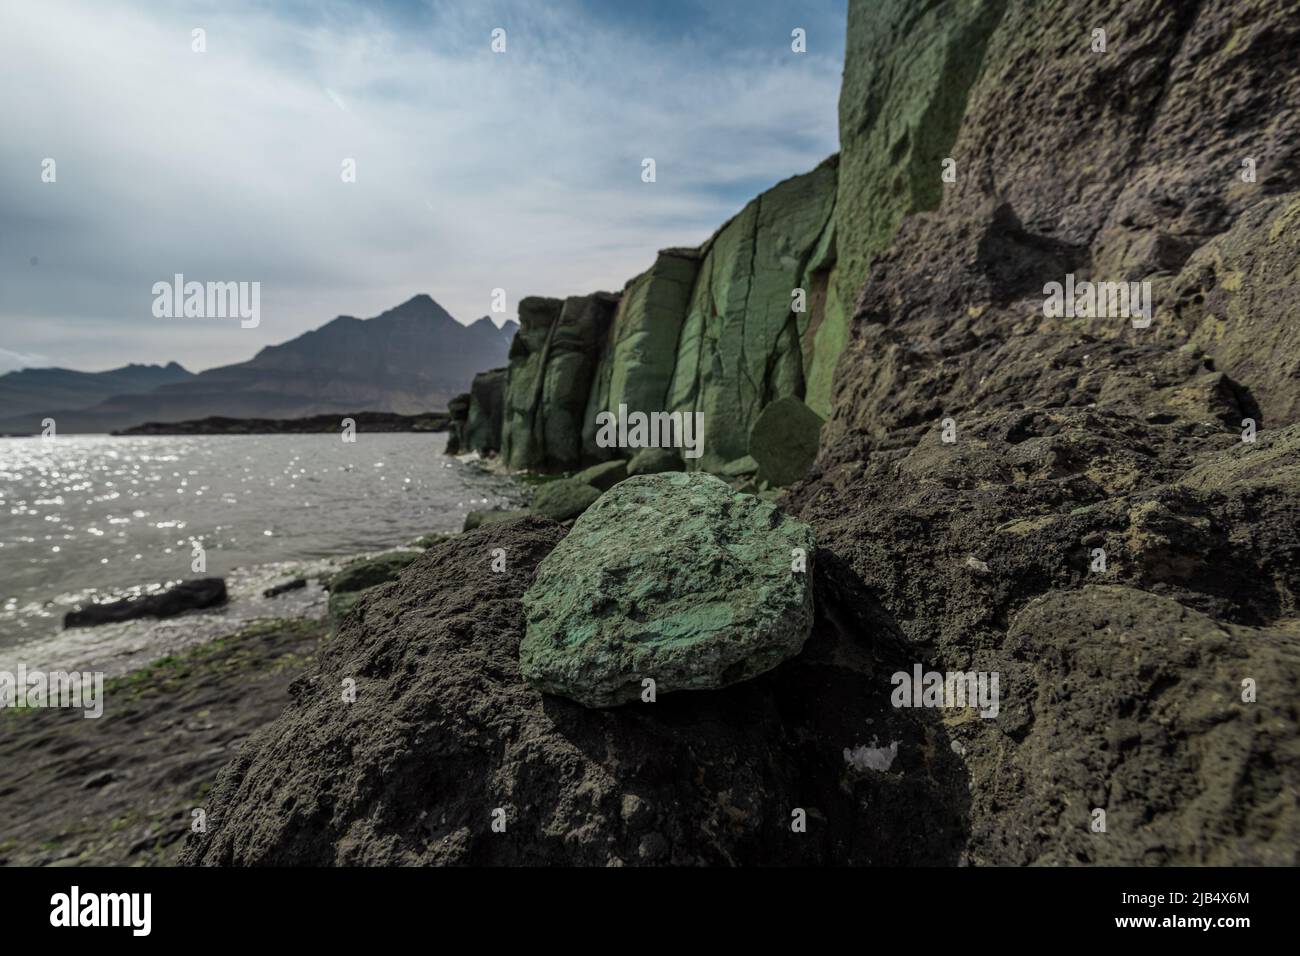 Green ignimbrite rock formations on the beach in southern iceland. Volcanic conglomerate with boulders and cobbles around. Stock Photo